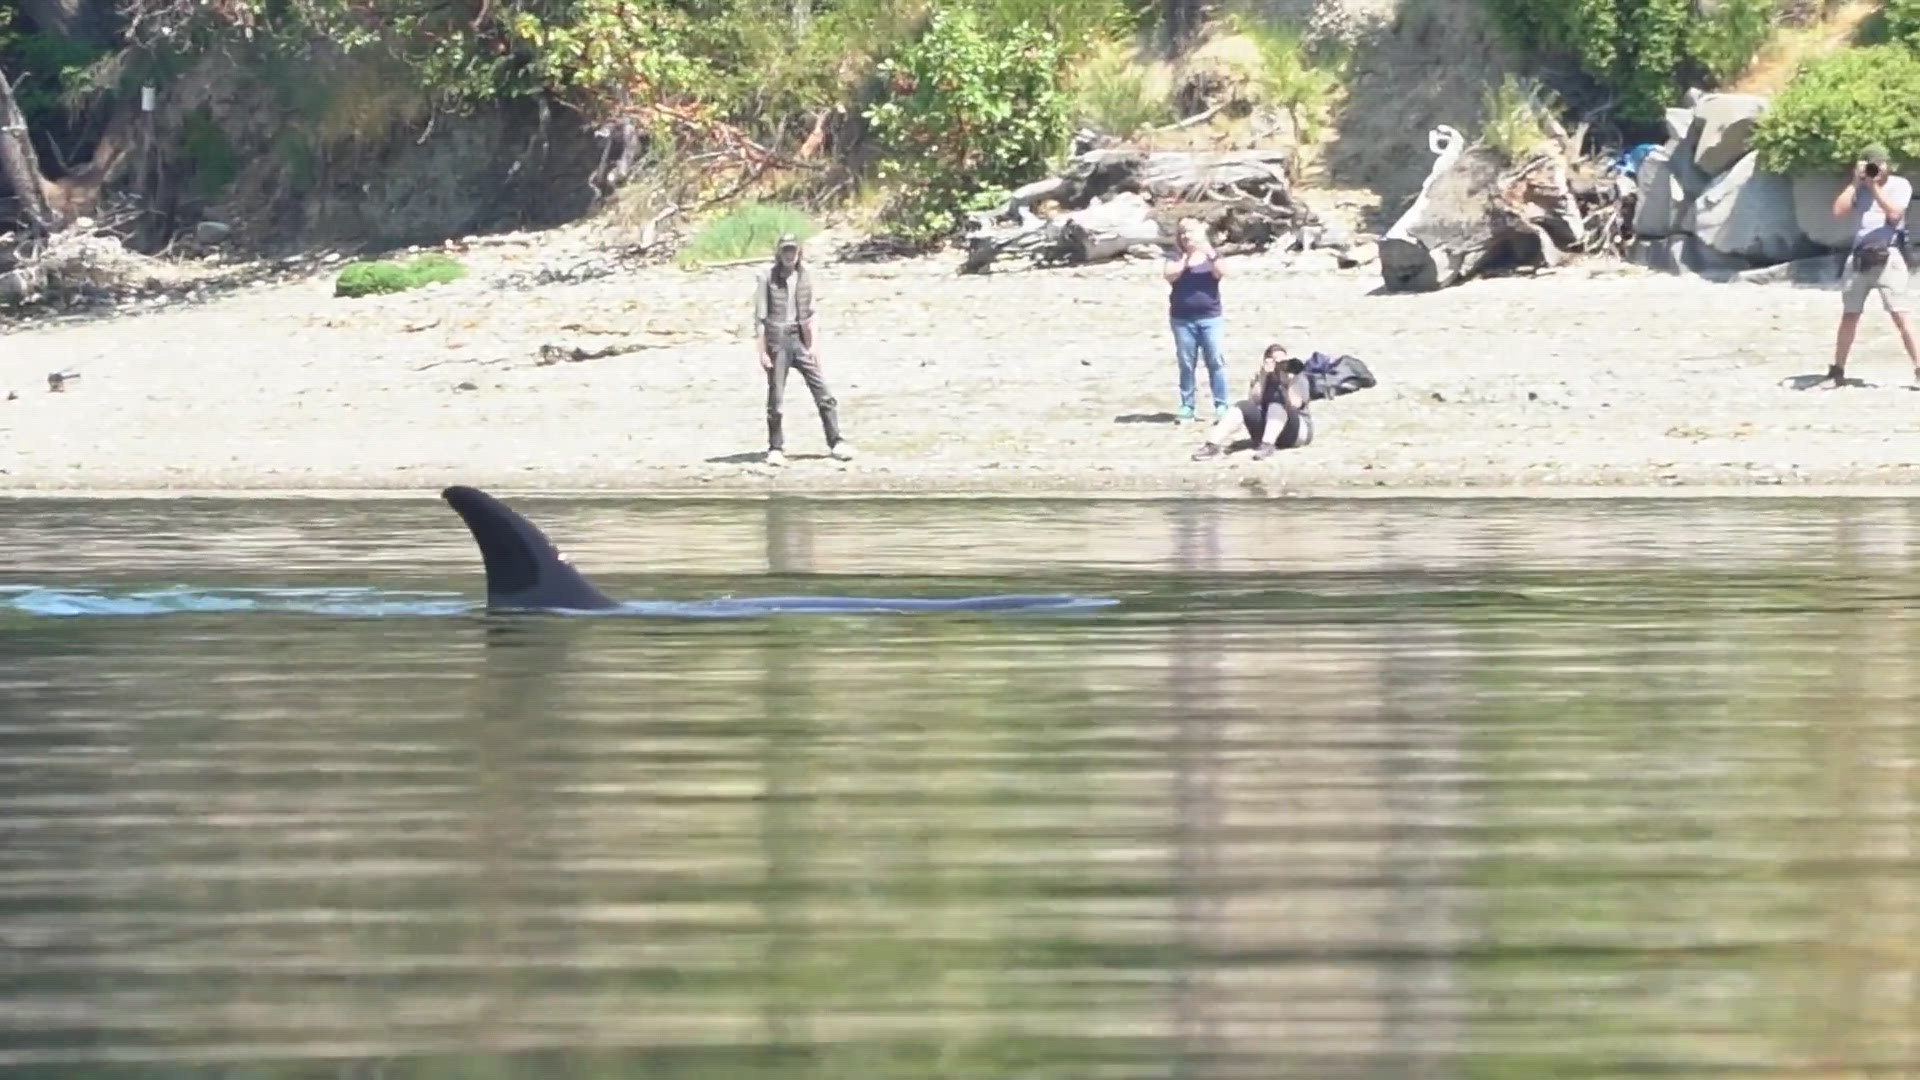 Video clips of orcas swimming in Shelton Washington via Hammersley Inlet.
Credit: Terrence Allison